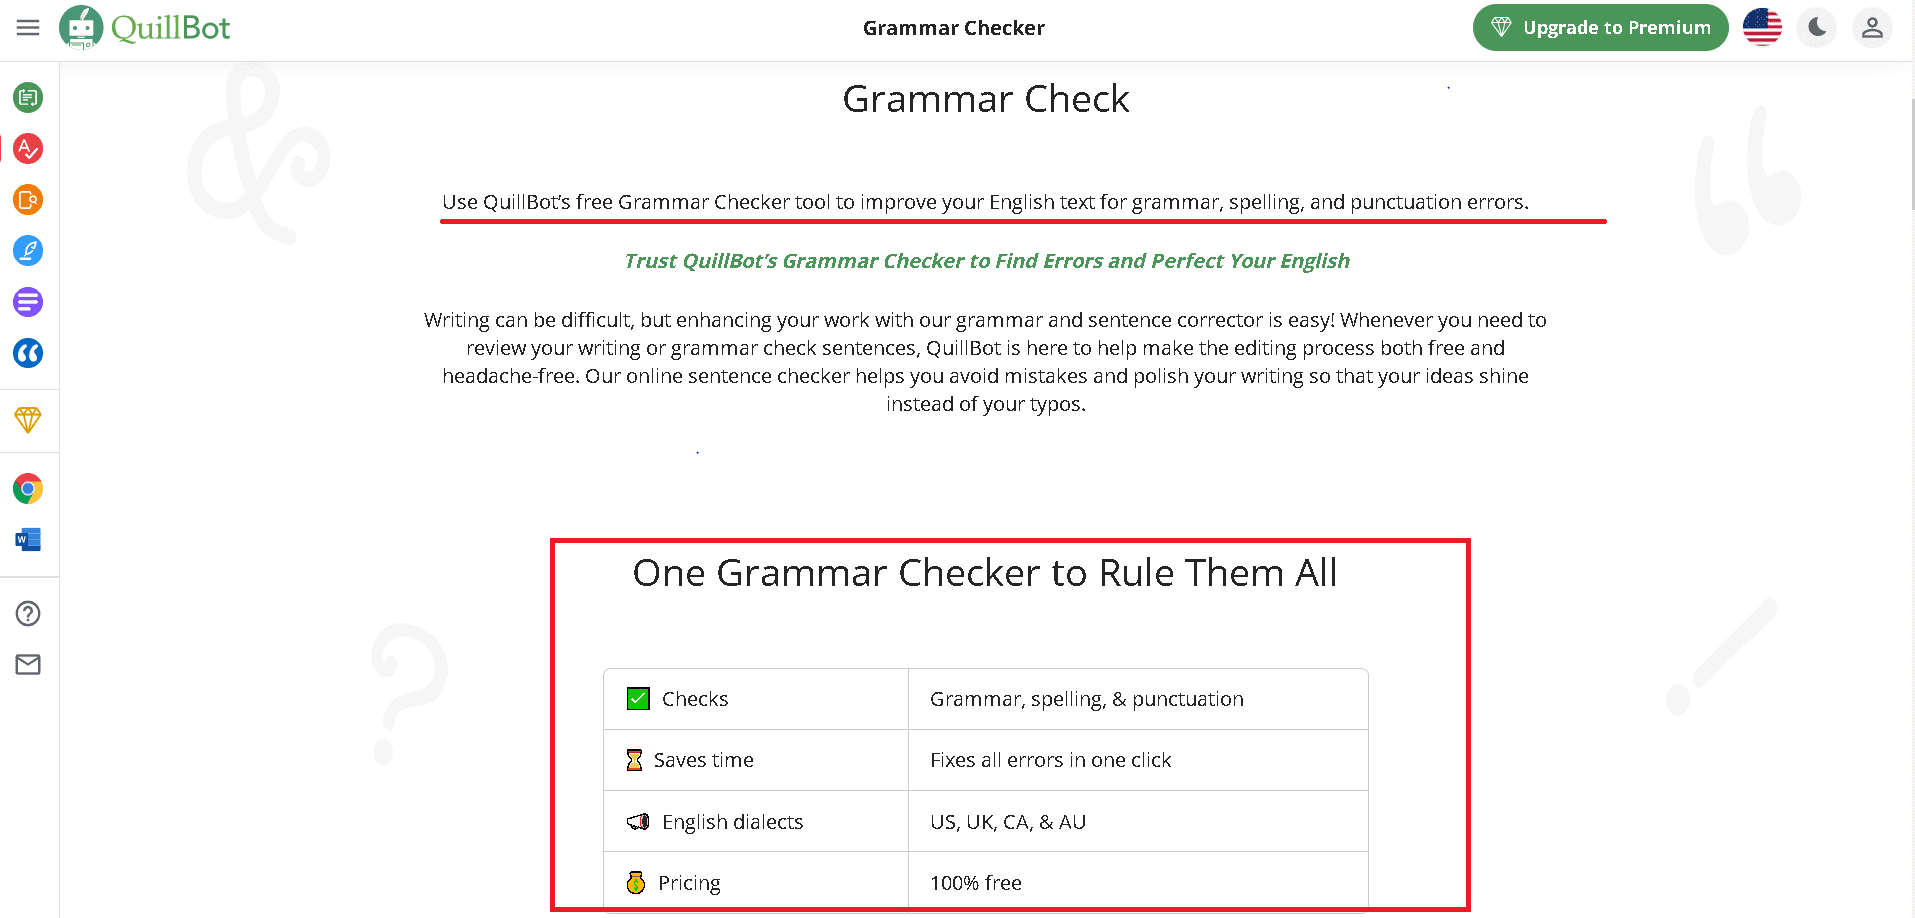 Quillbot AI offers a free grammar checker tool